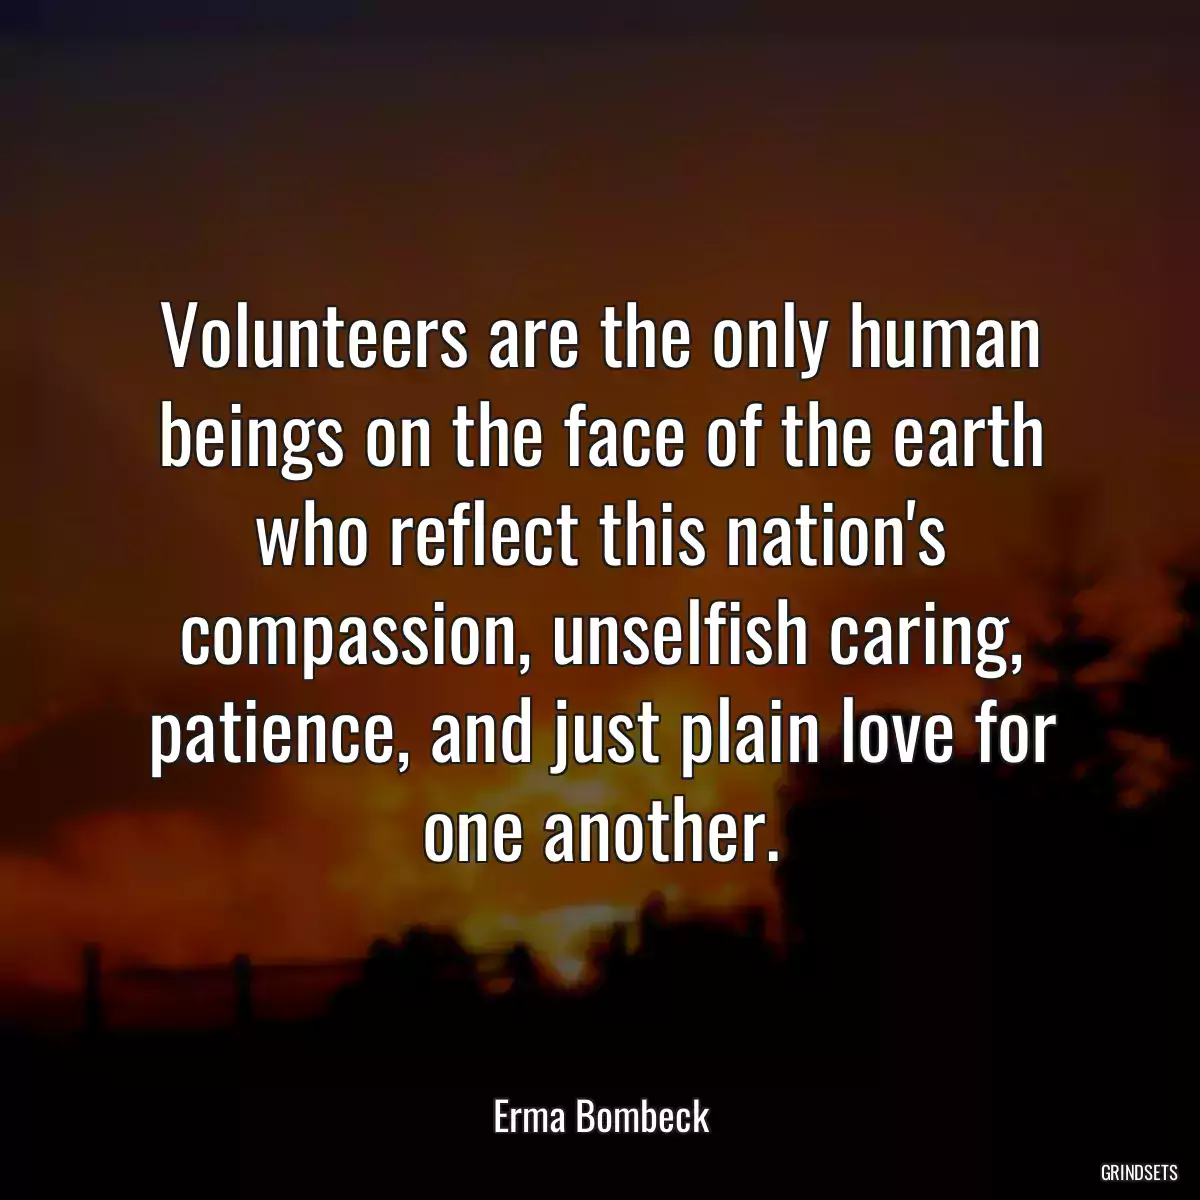 Volunteers are the only human beings on the face of the earth who reflect this nation\'s compassion, unselfish caring, patience, and just plain love for one another.